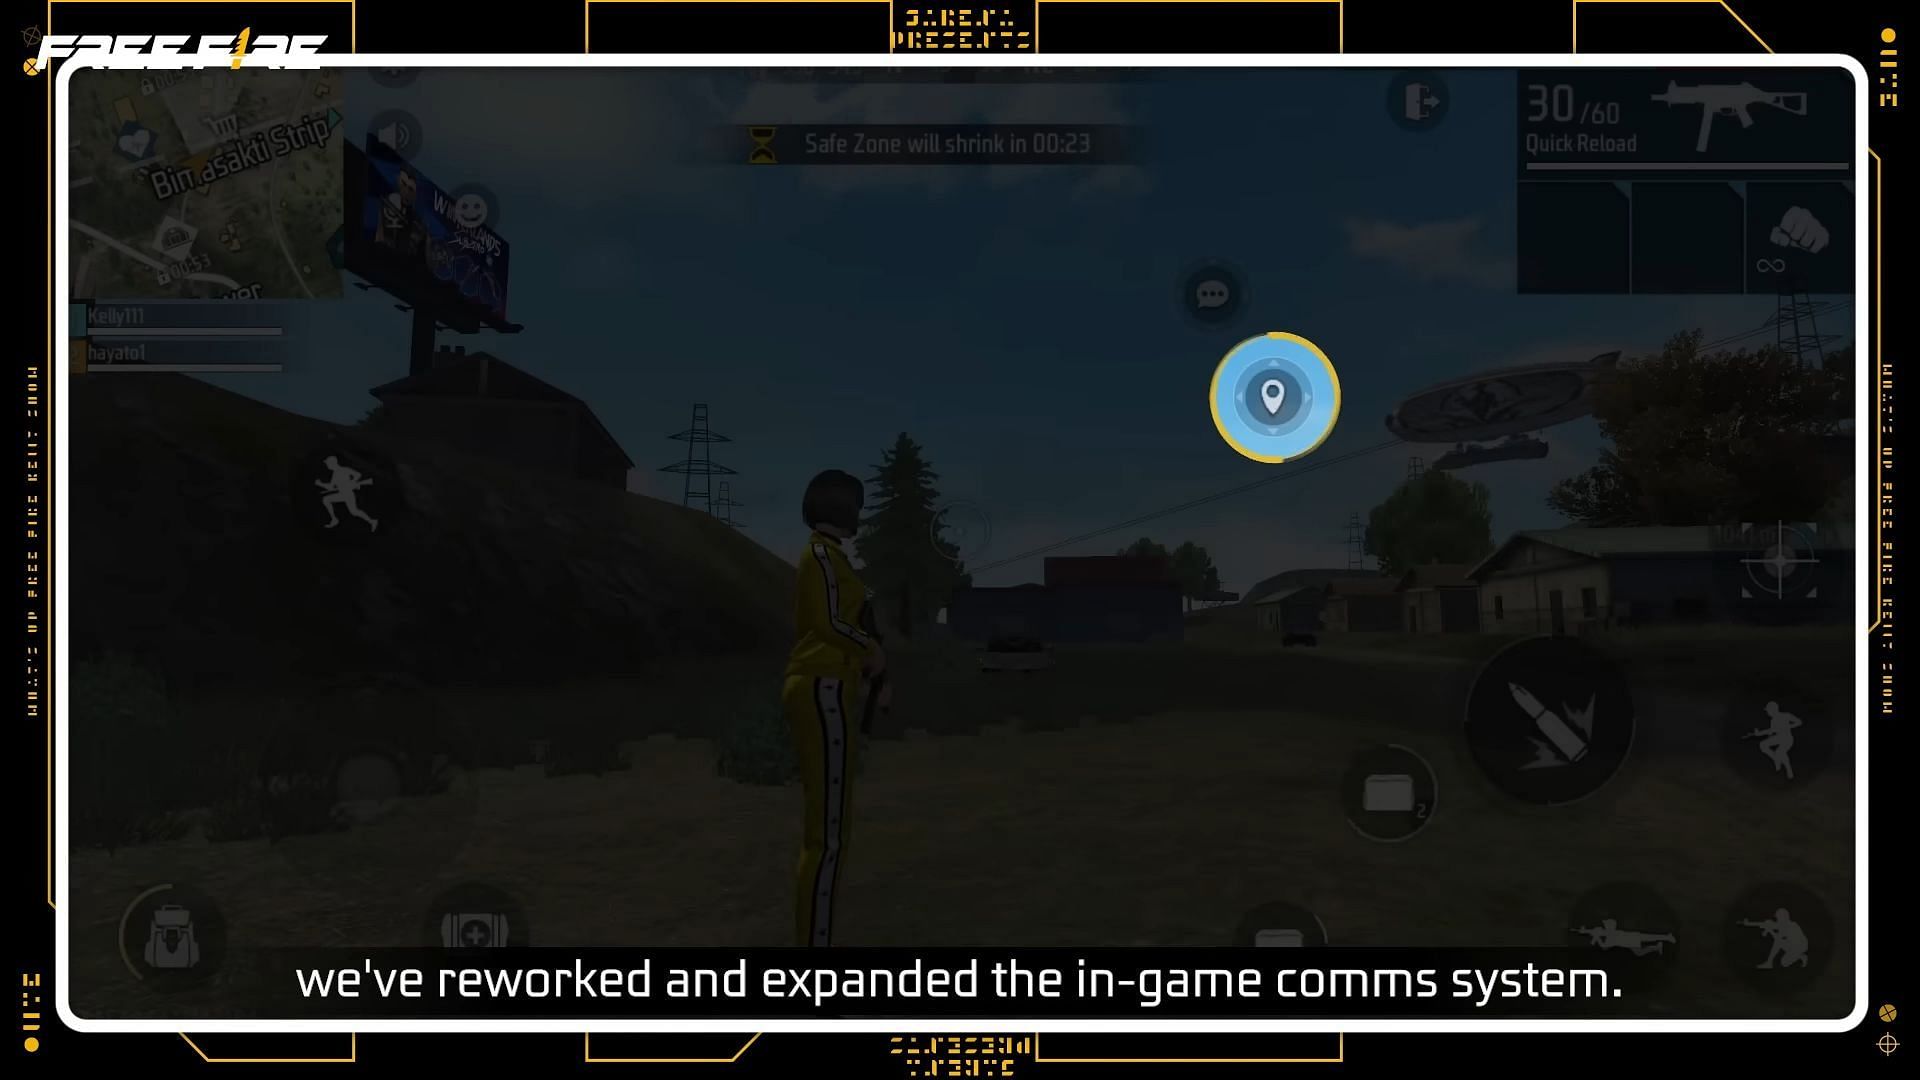 In-game communications will be refined (Image via Garena)